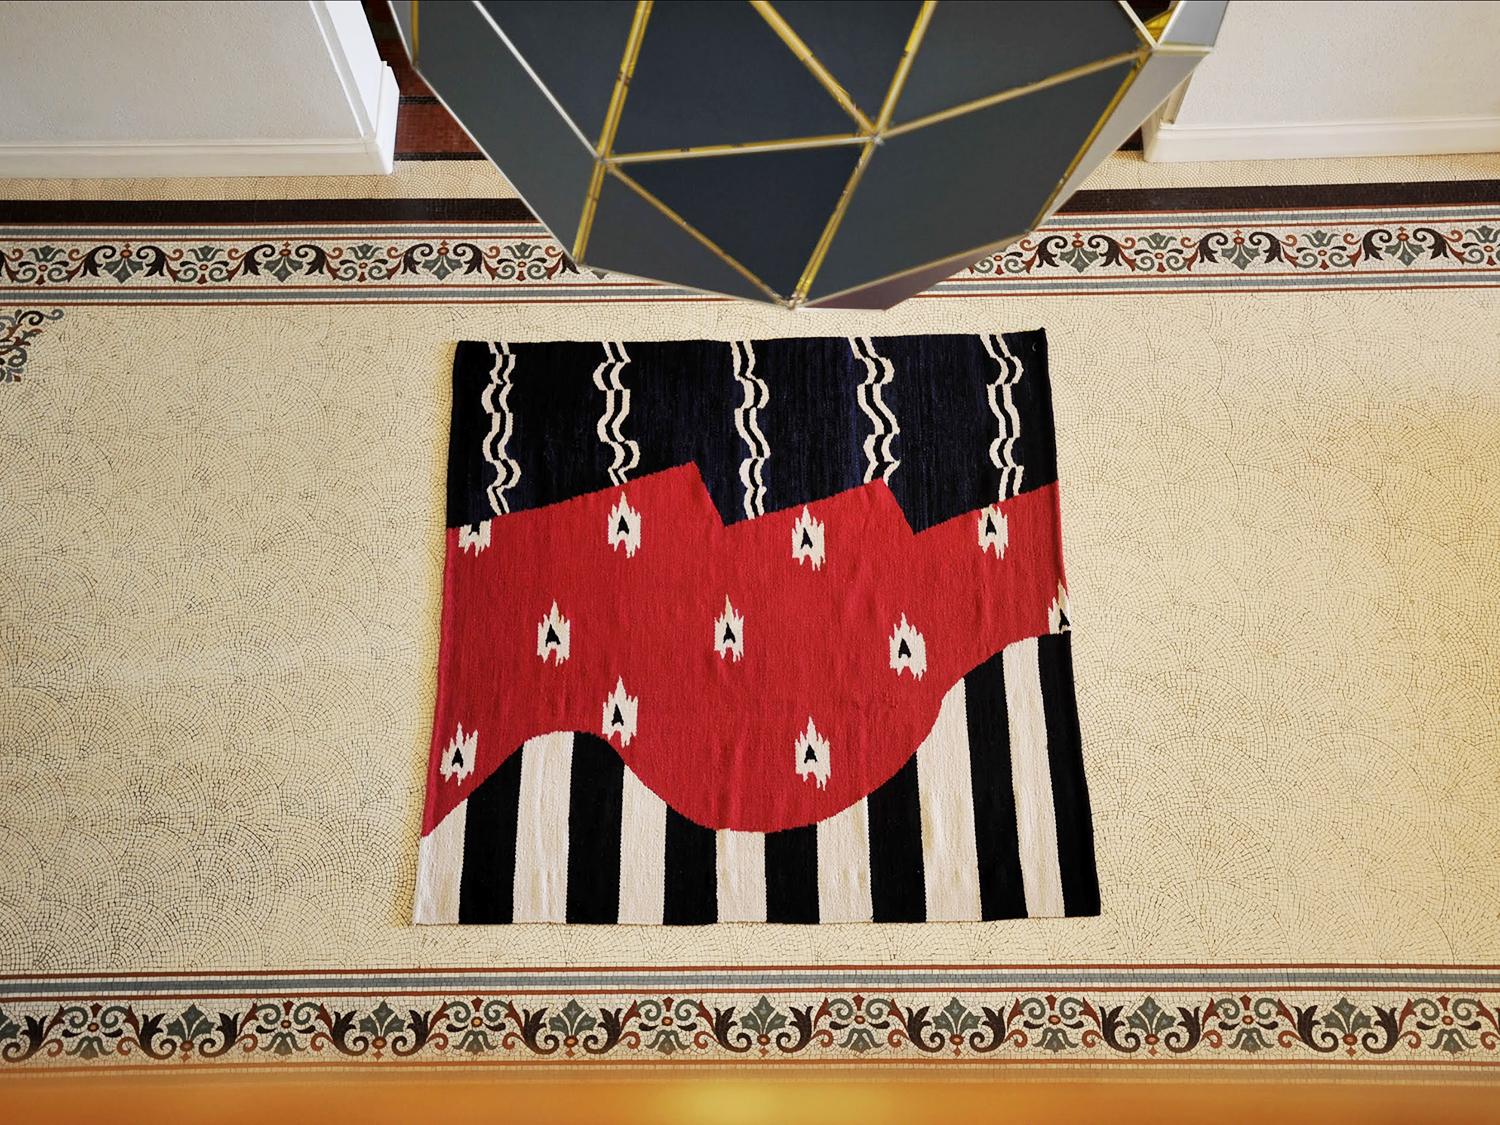 Adapted from the original artwork by Juan Stoppani & Jean-Yves Legavre, Poncho, 2015.

LALANA RUGS is an applied arts initiative born from the desire to combine proposals by contemporary artists with traditional local techniques and noble materials.